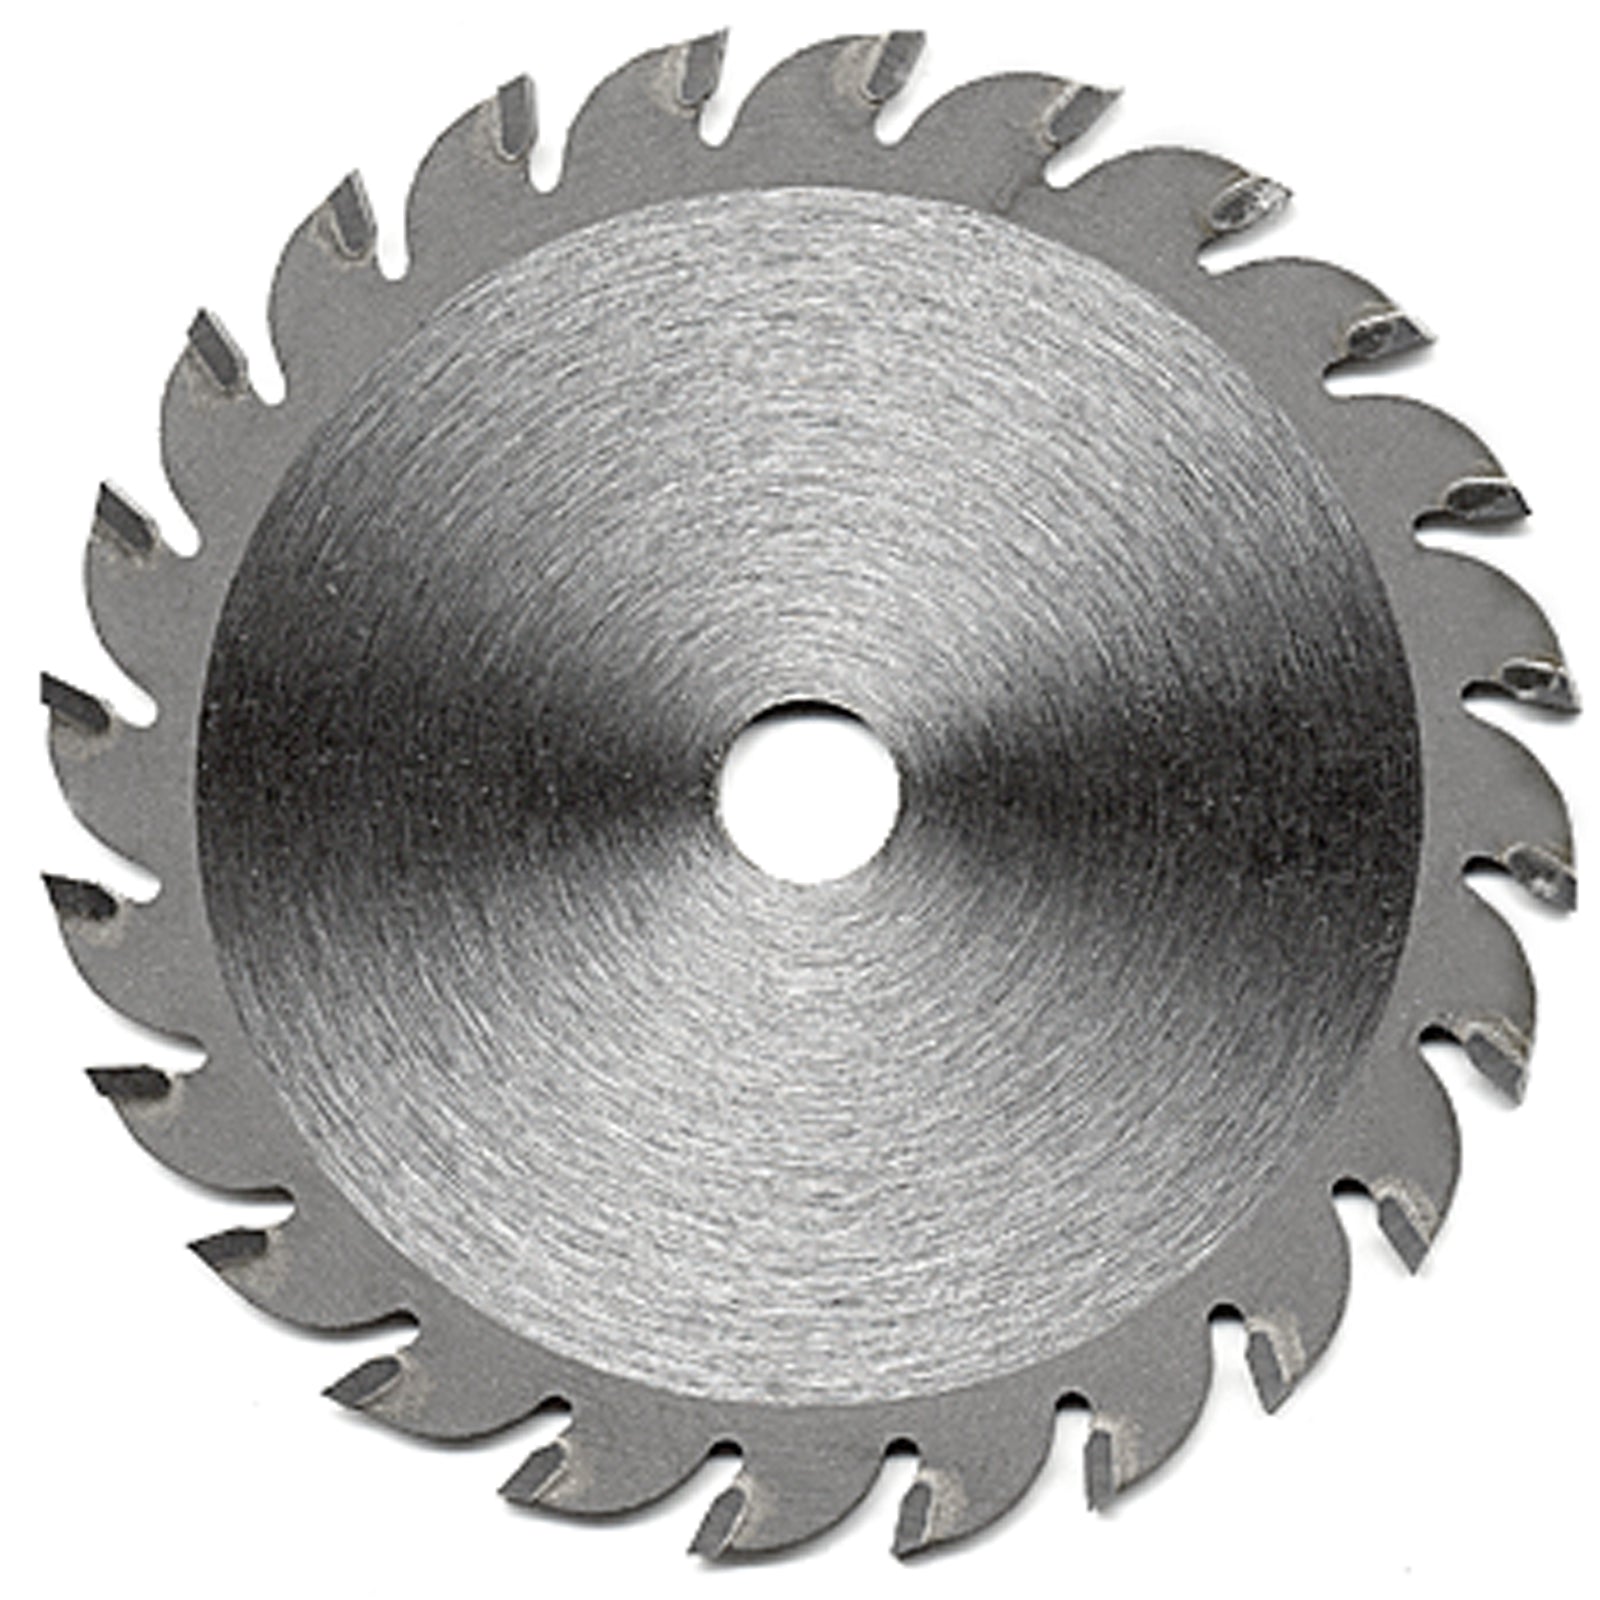 24 Tooth Carbide Tip Saw Blade (3 - 1/4 Inch Dia., 10 mm hole) - Micro - Mark Saw Accessories